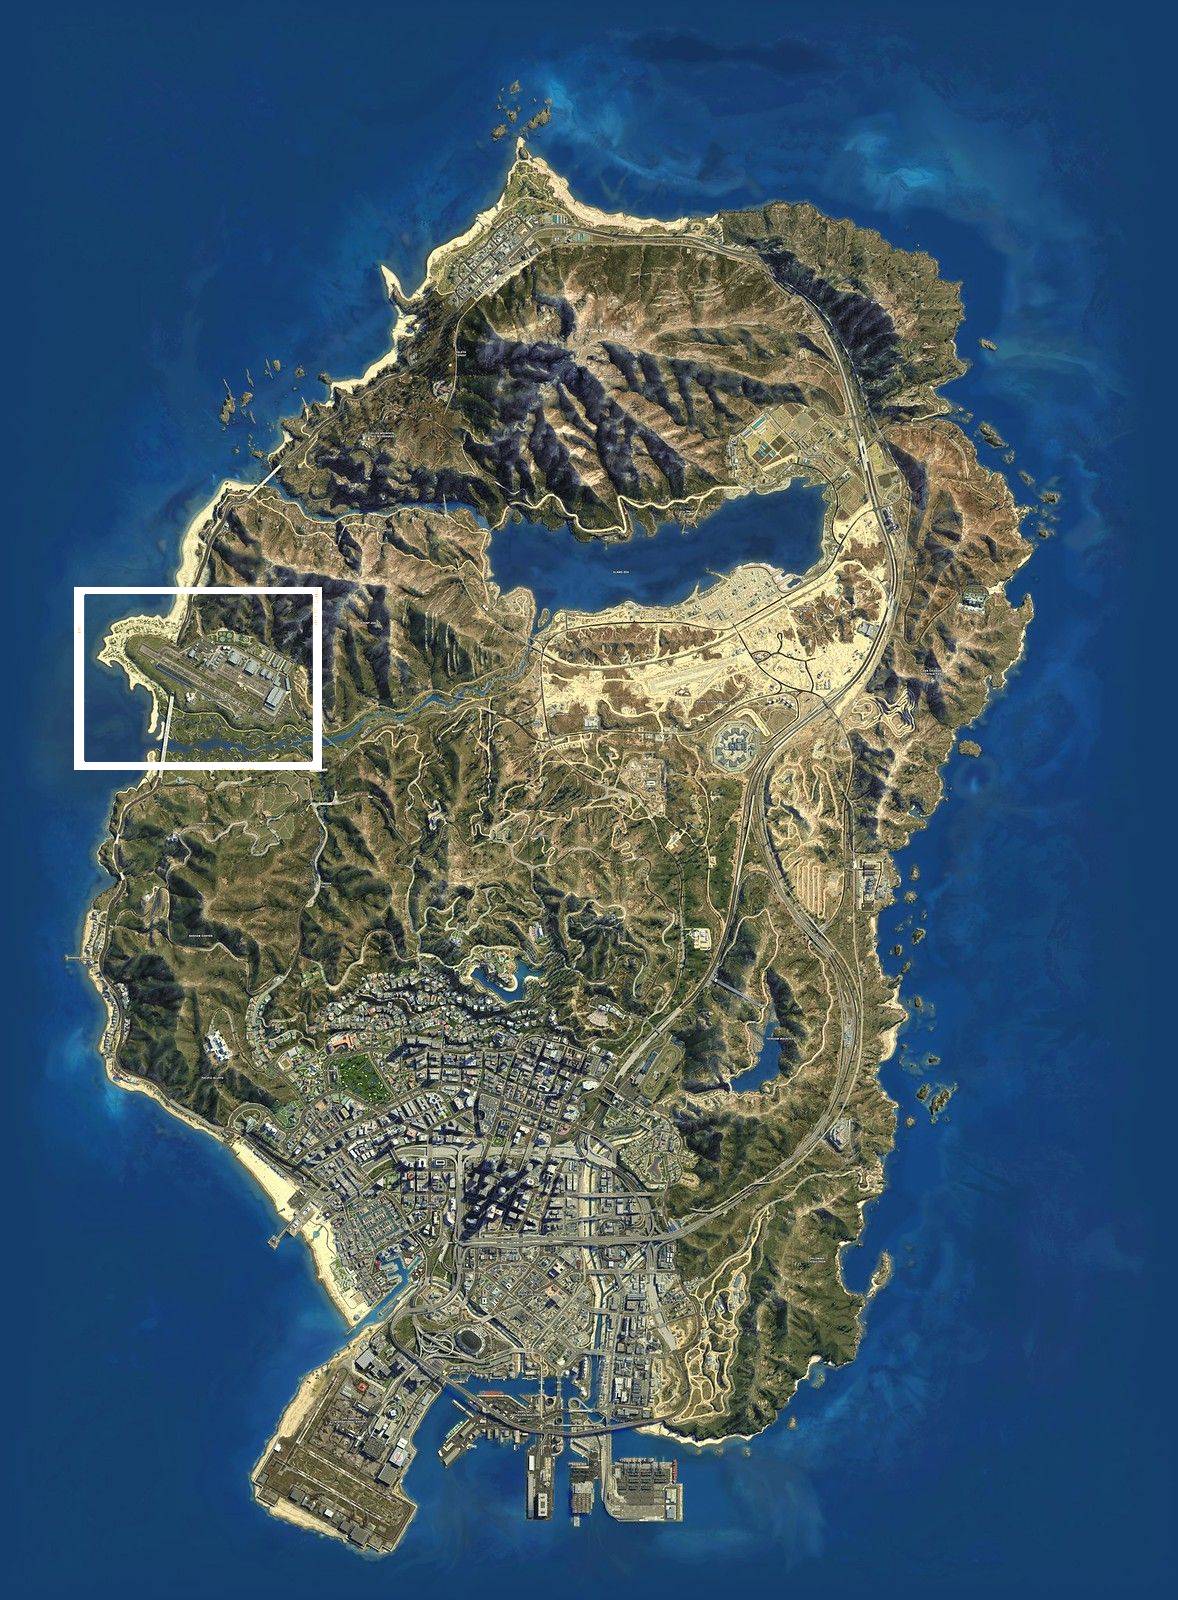 gta 5 airport location on map